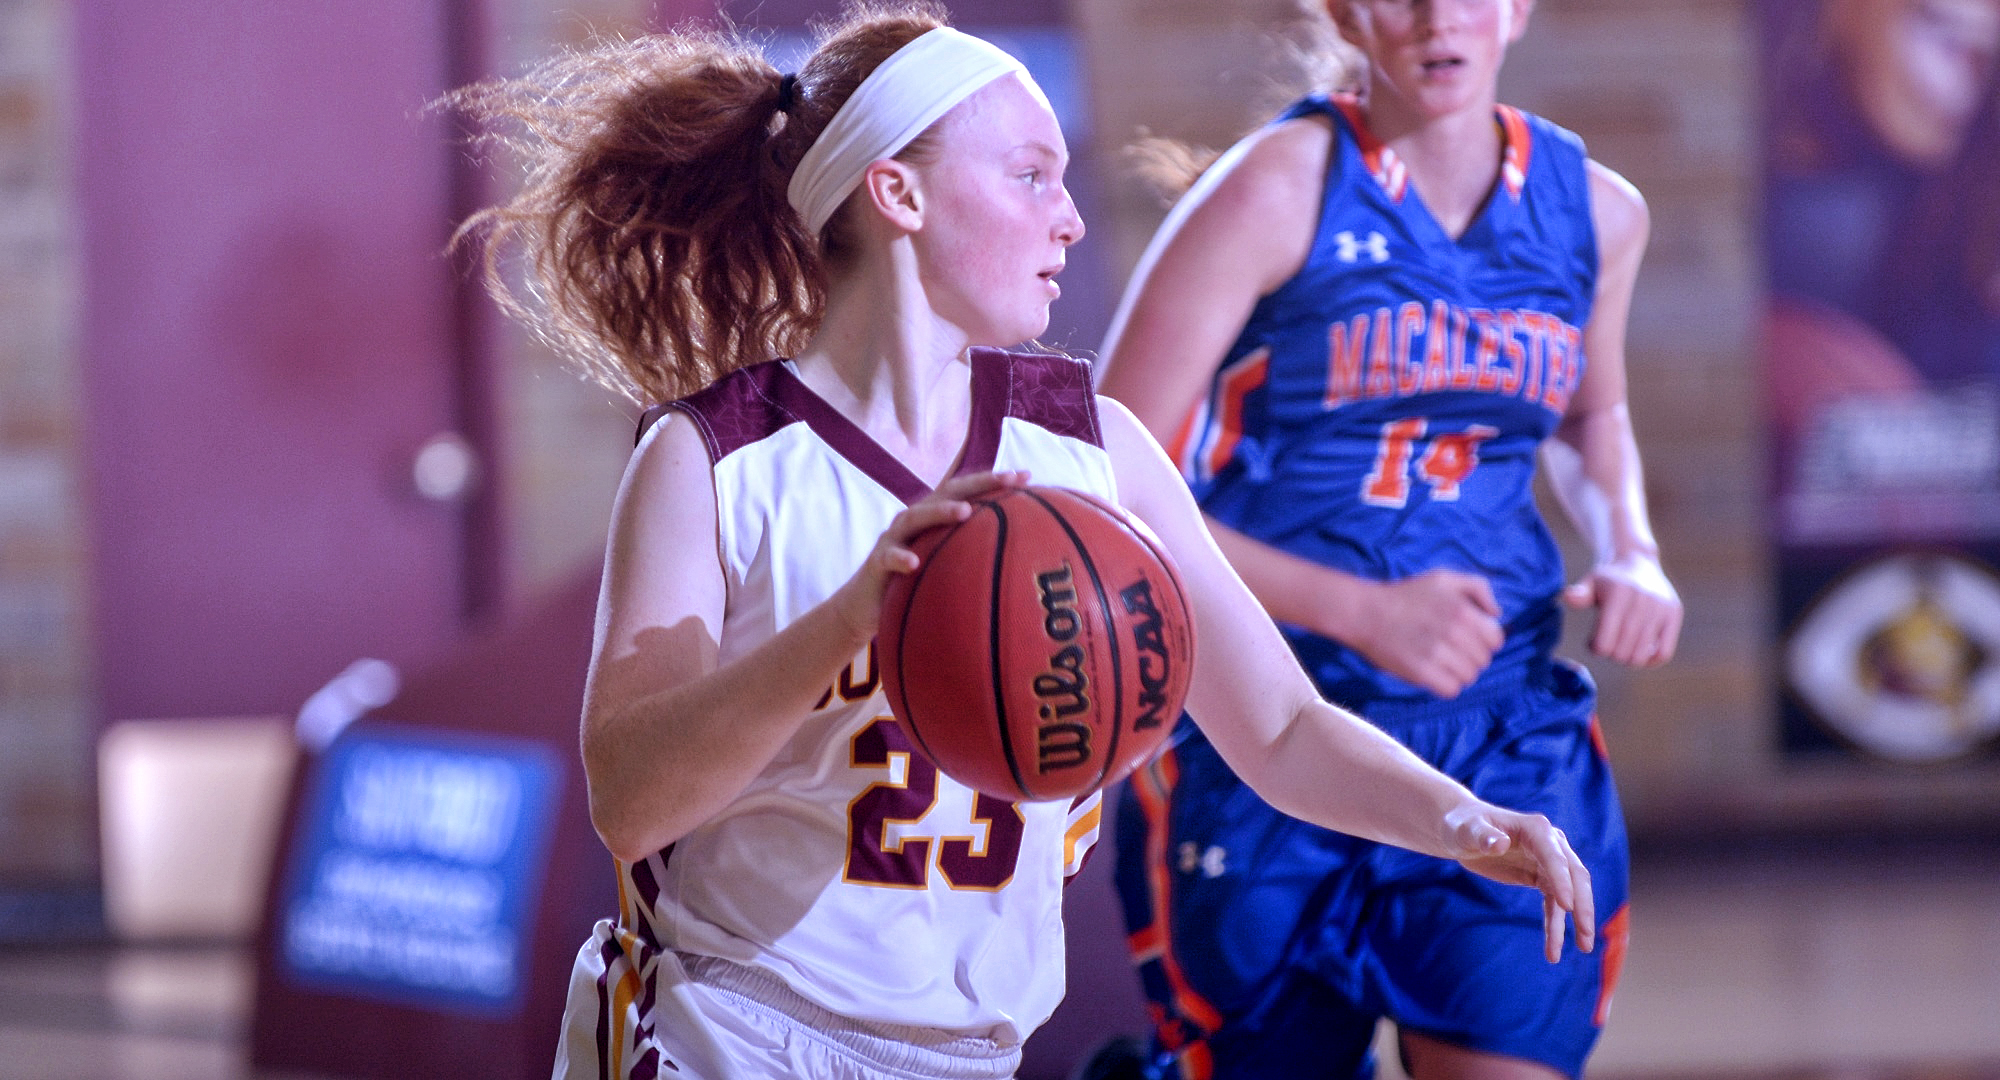 Rachel Hoernemann scored the game-winning layup in the final seconds of the Cobbers' 62-60 win over Macalester.